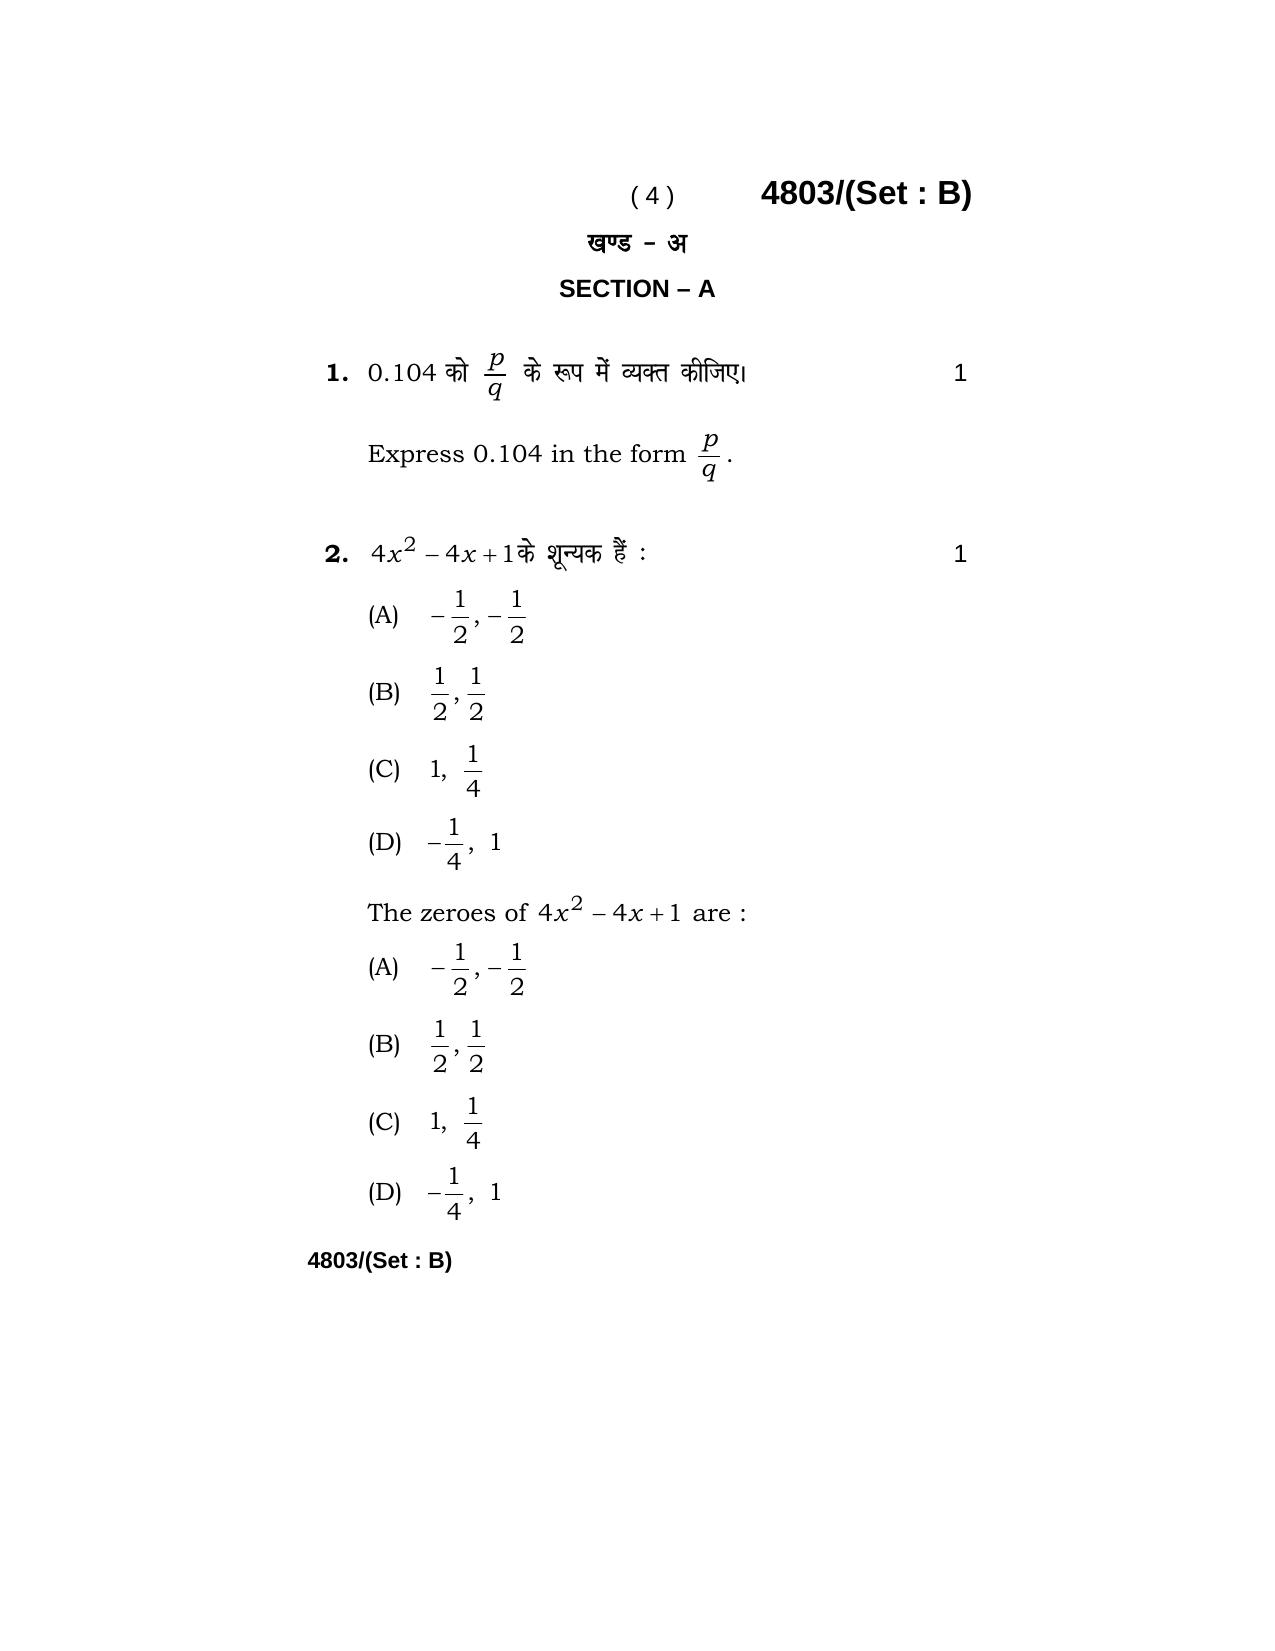 Haryana Board HBSE Class 10 Mathematics 2020 Question Paper - Page 20